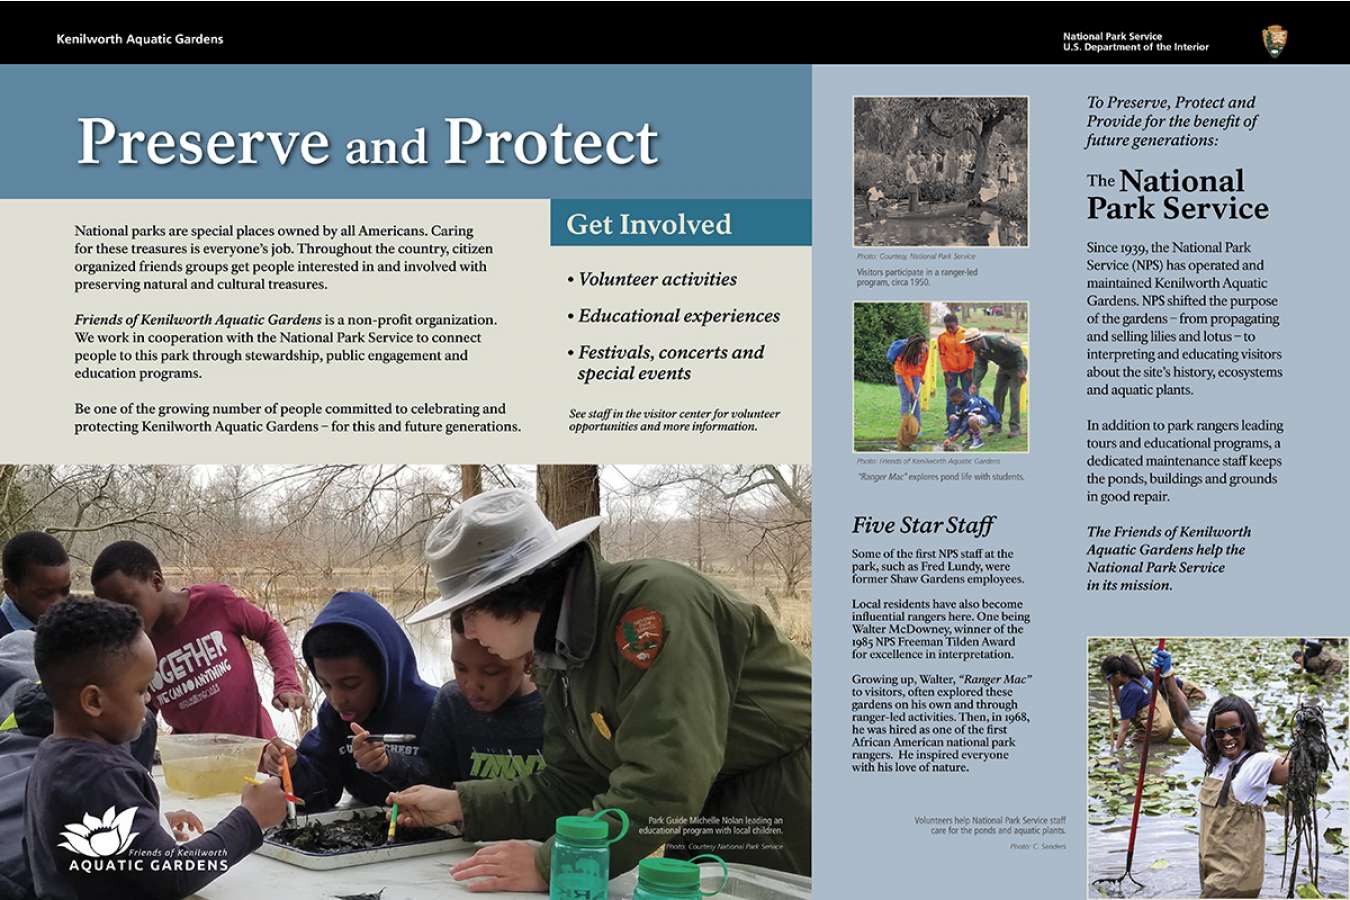 fokag 7 : Park rangers offer daily classes, guided tours and wildlife information to visitors.